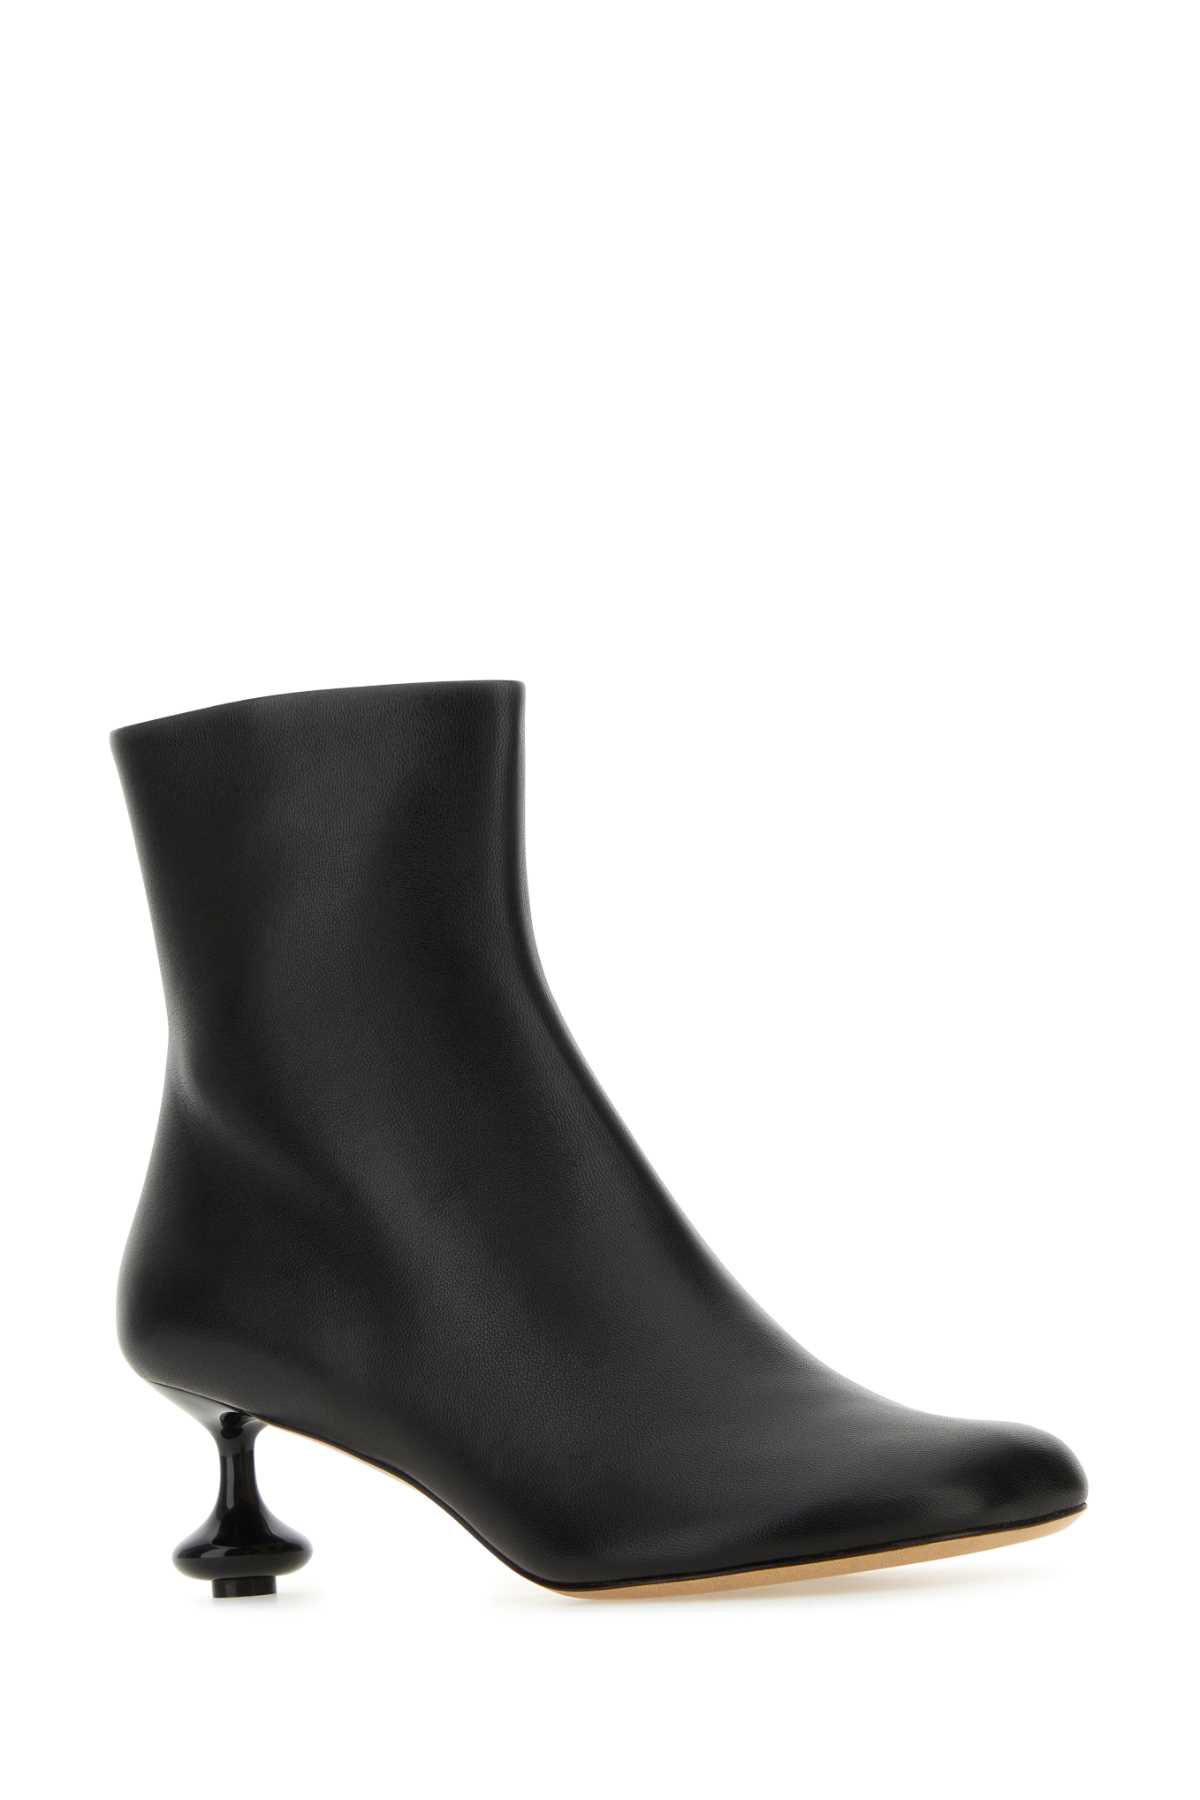 Shop Loewe Black Nappa Leather Toy Ankle Boots